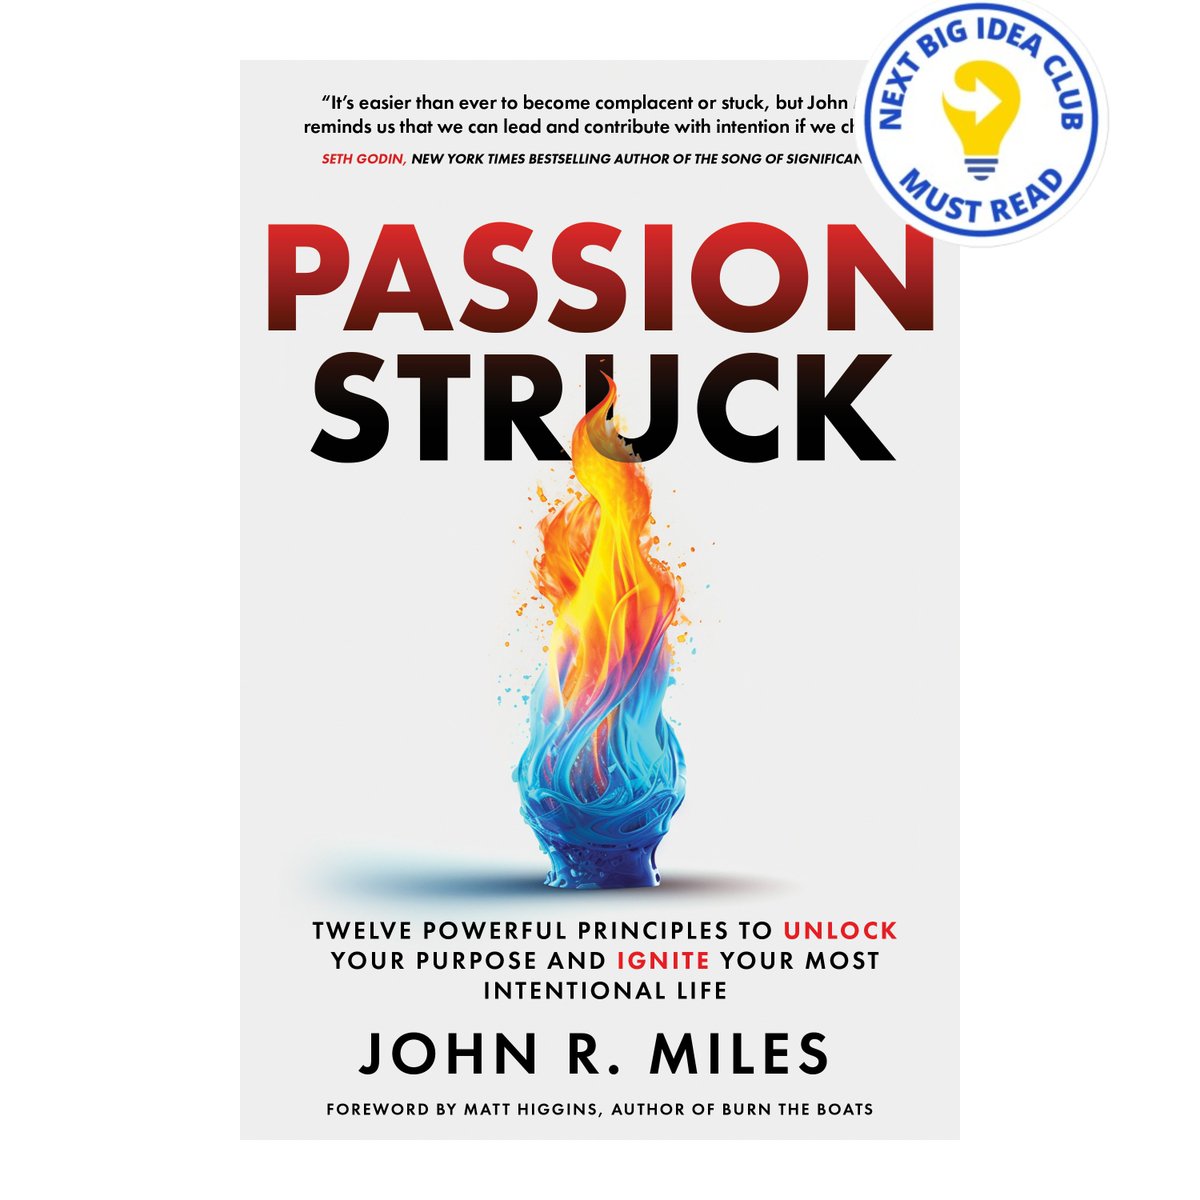 I highly recommend this new book - #PassionStruck - from my friend @John_RMiles, filled with great advice for us all! amzn.to/3HZweHi